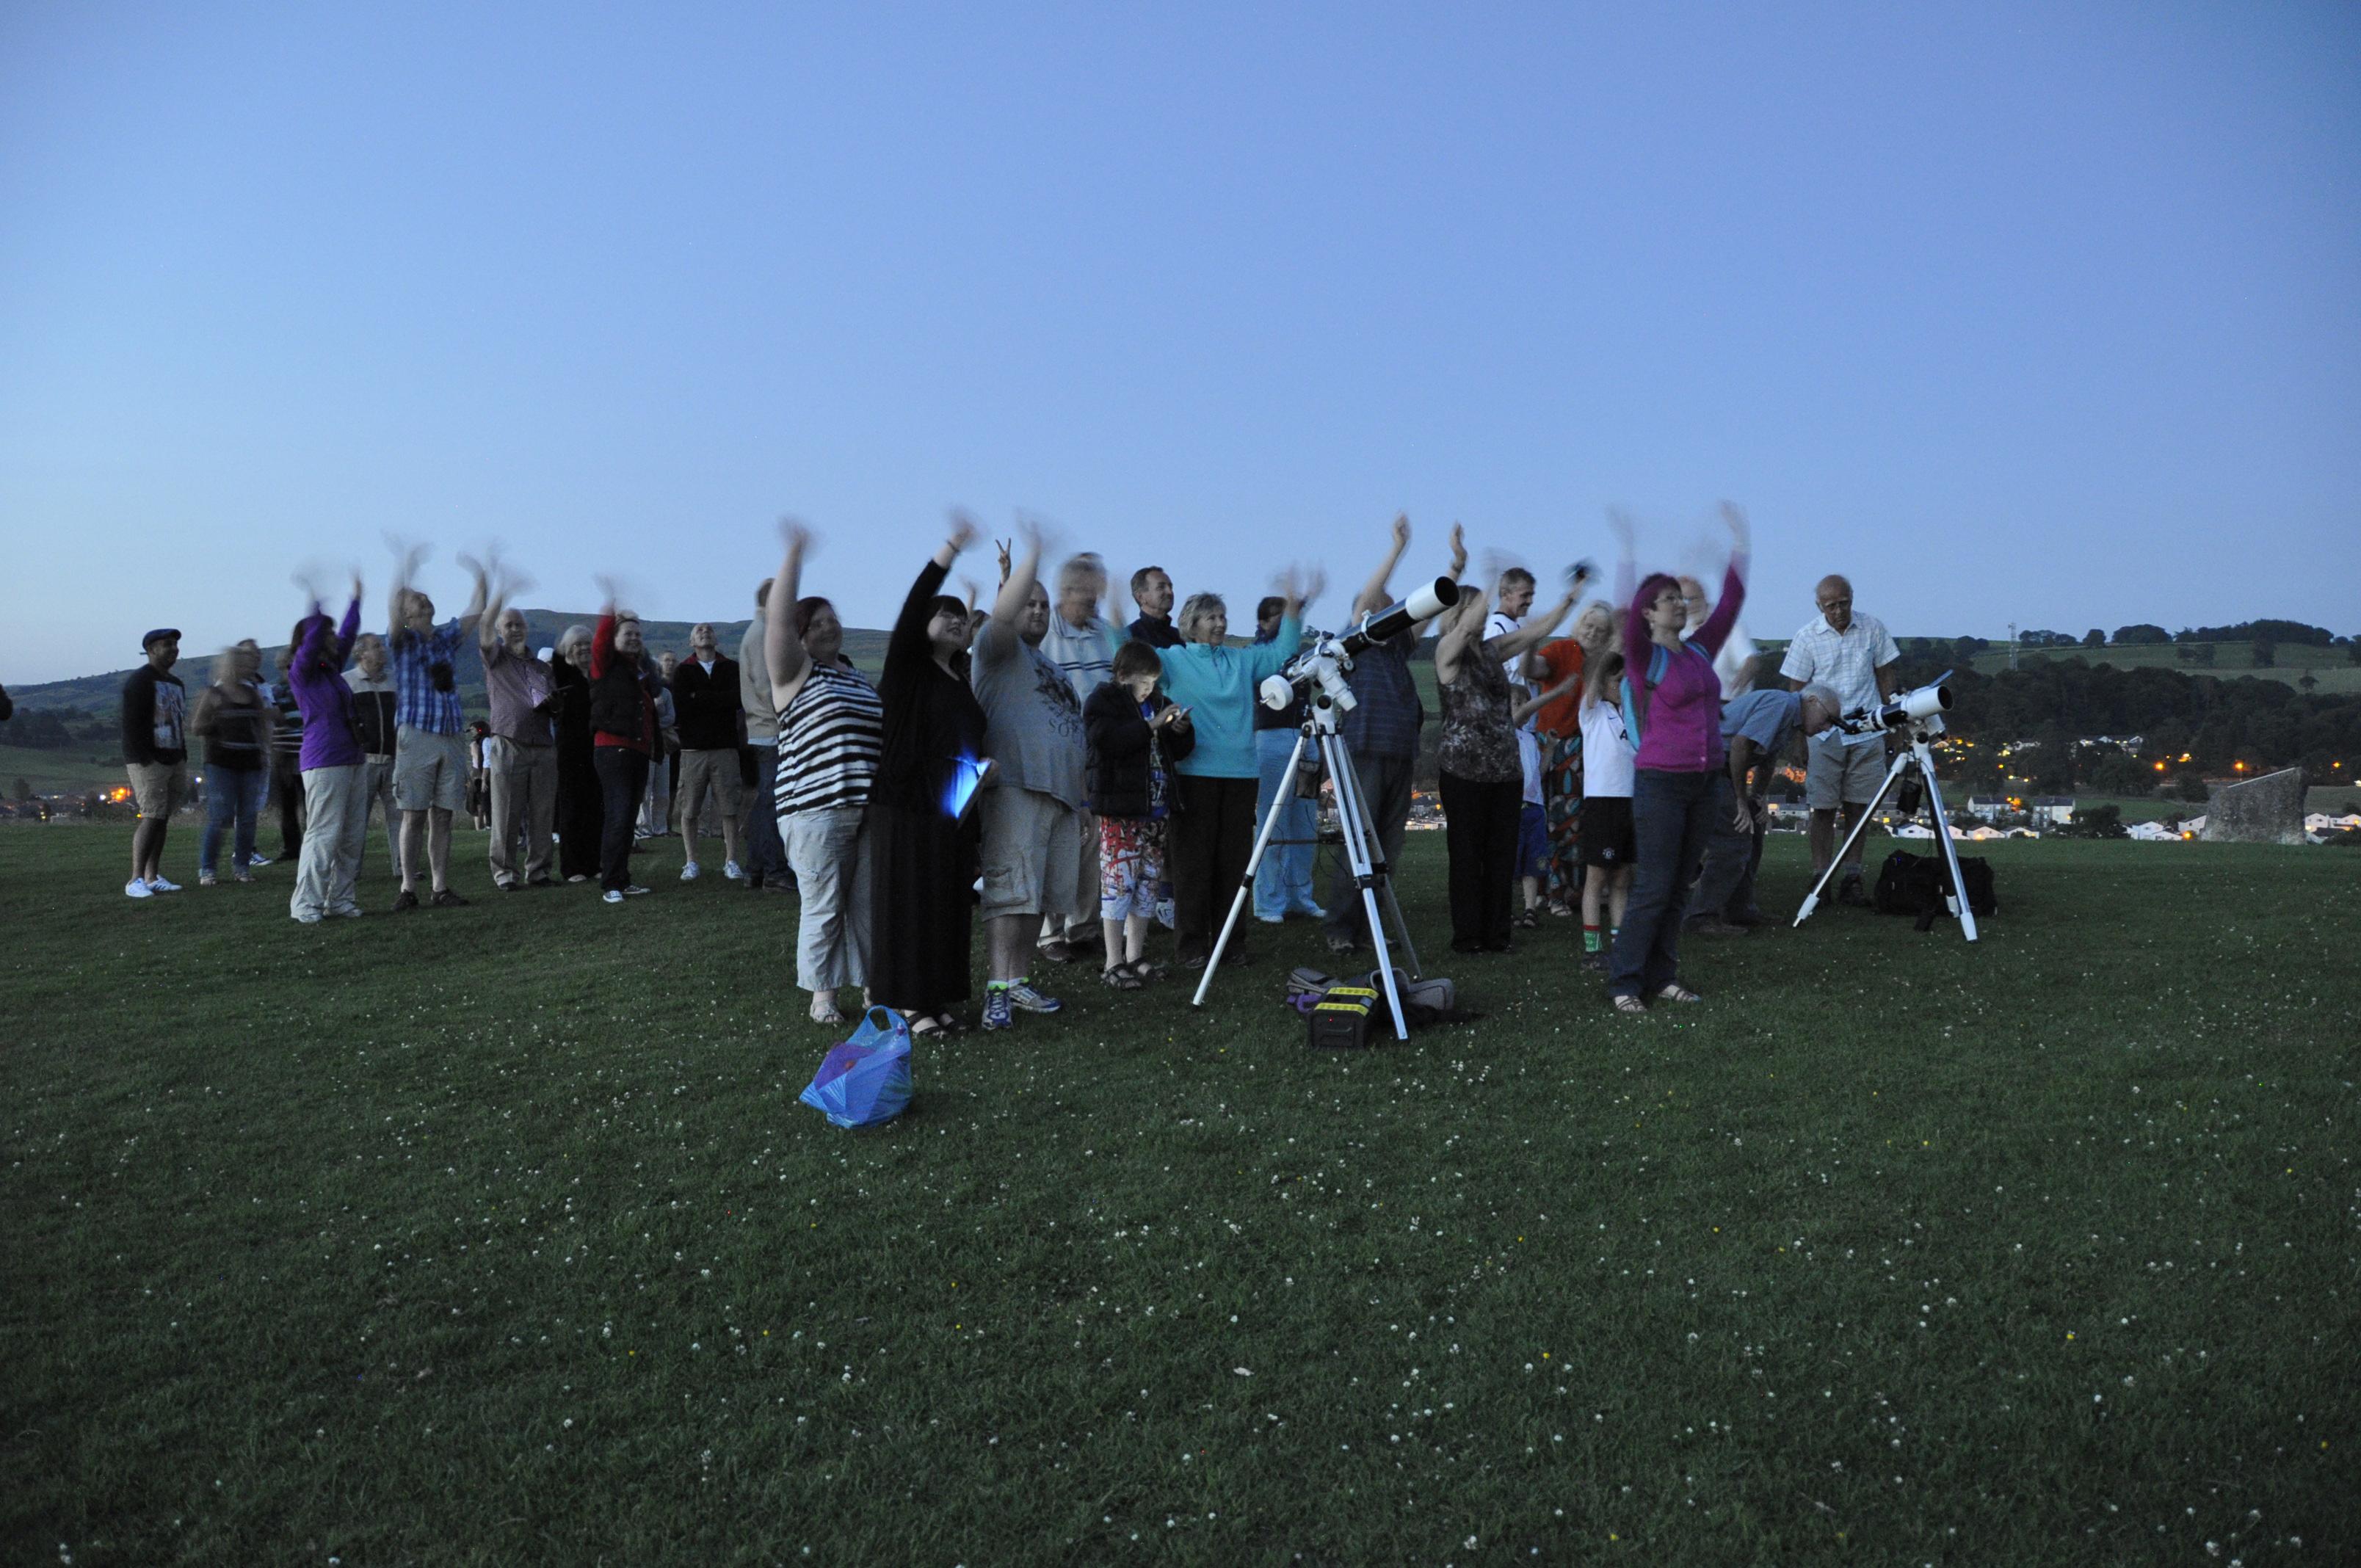 Telescopes, telephone and tablets at the ready, a group of amateur astronomers gathers under twilight skies to wave at Saturn on July 19, 2013. Their gathering in the town of Kendal in England's Cumbria district was one of many international celebrations as Earth was imaged from deep space by NASA's Cassini spacecraft.